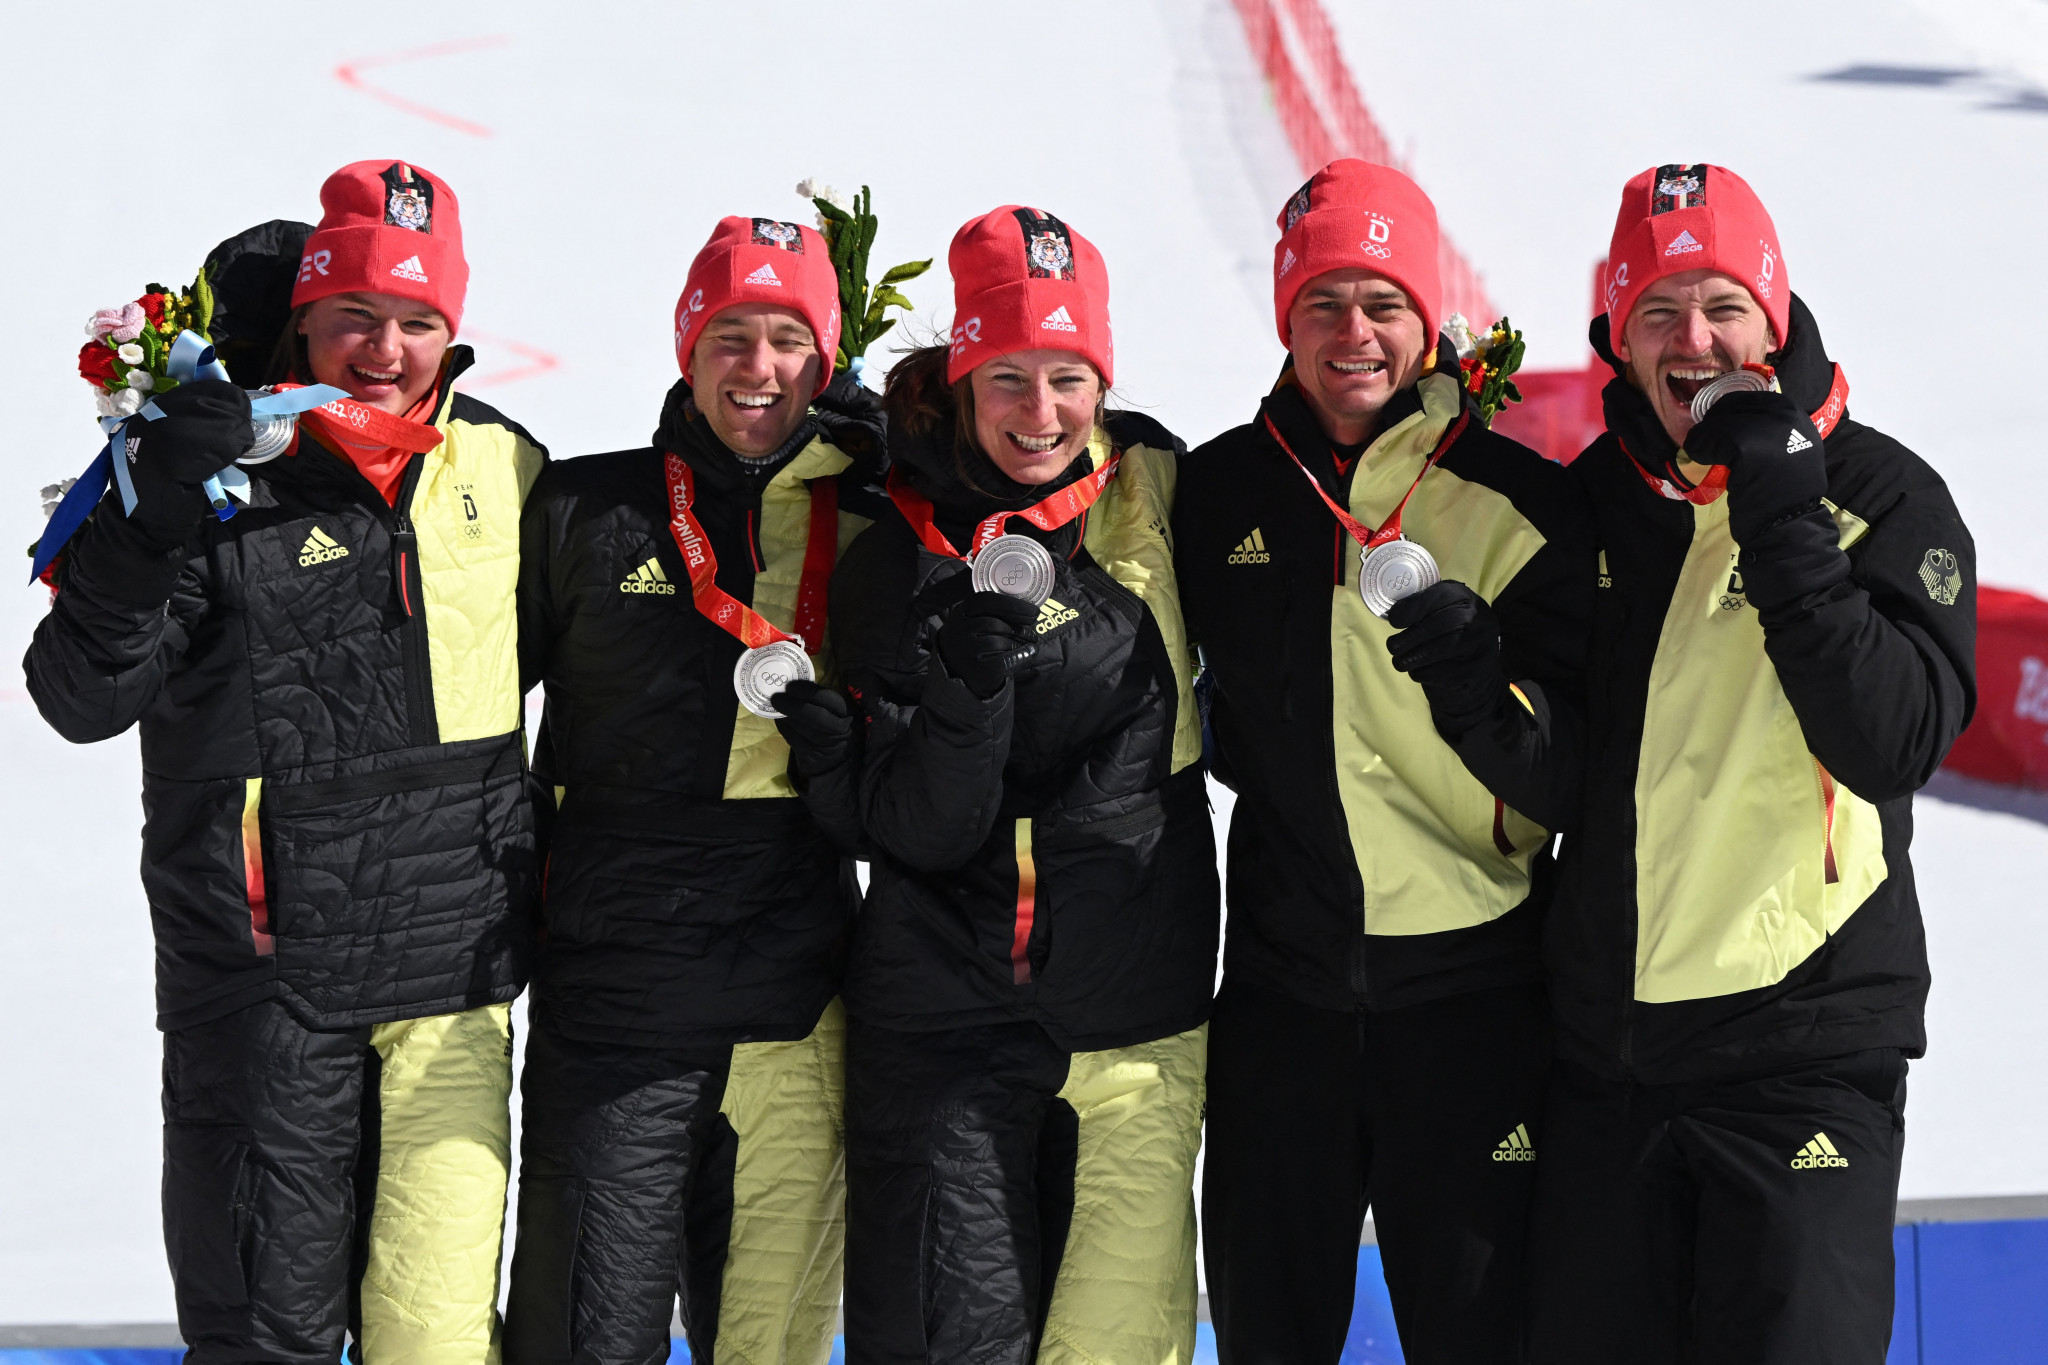 Germany won silver in the alpine skiing mixed team event ©Getty Images